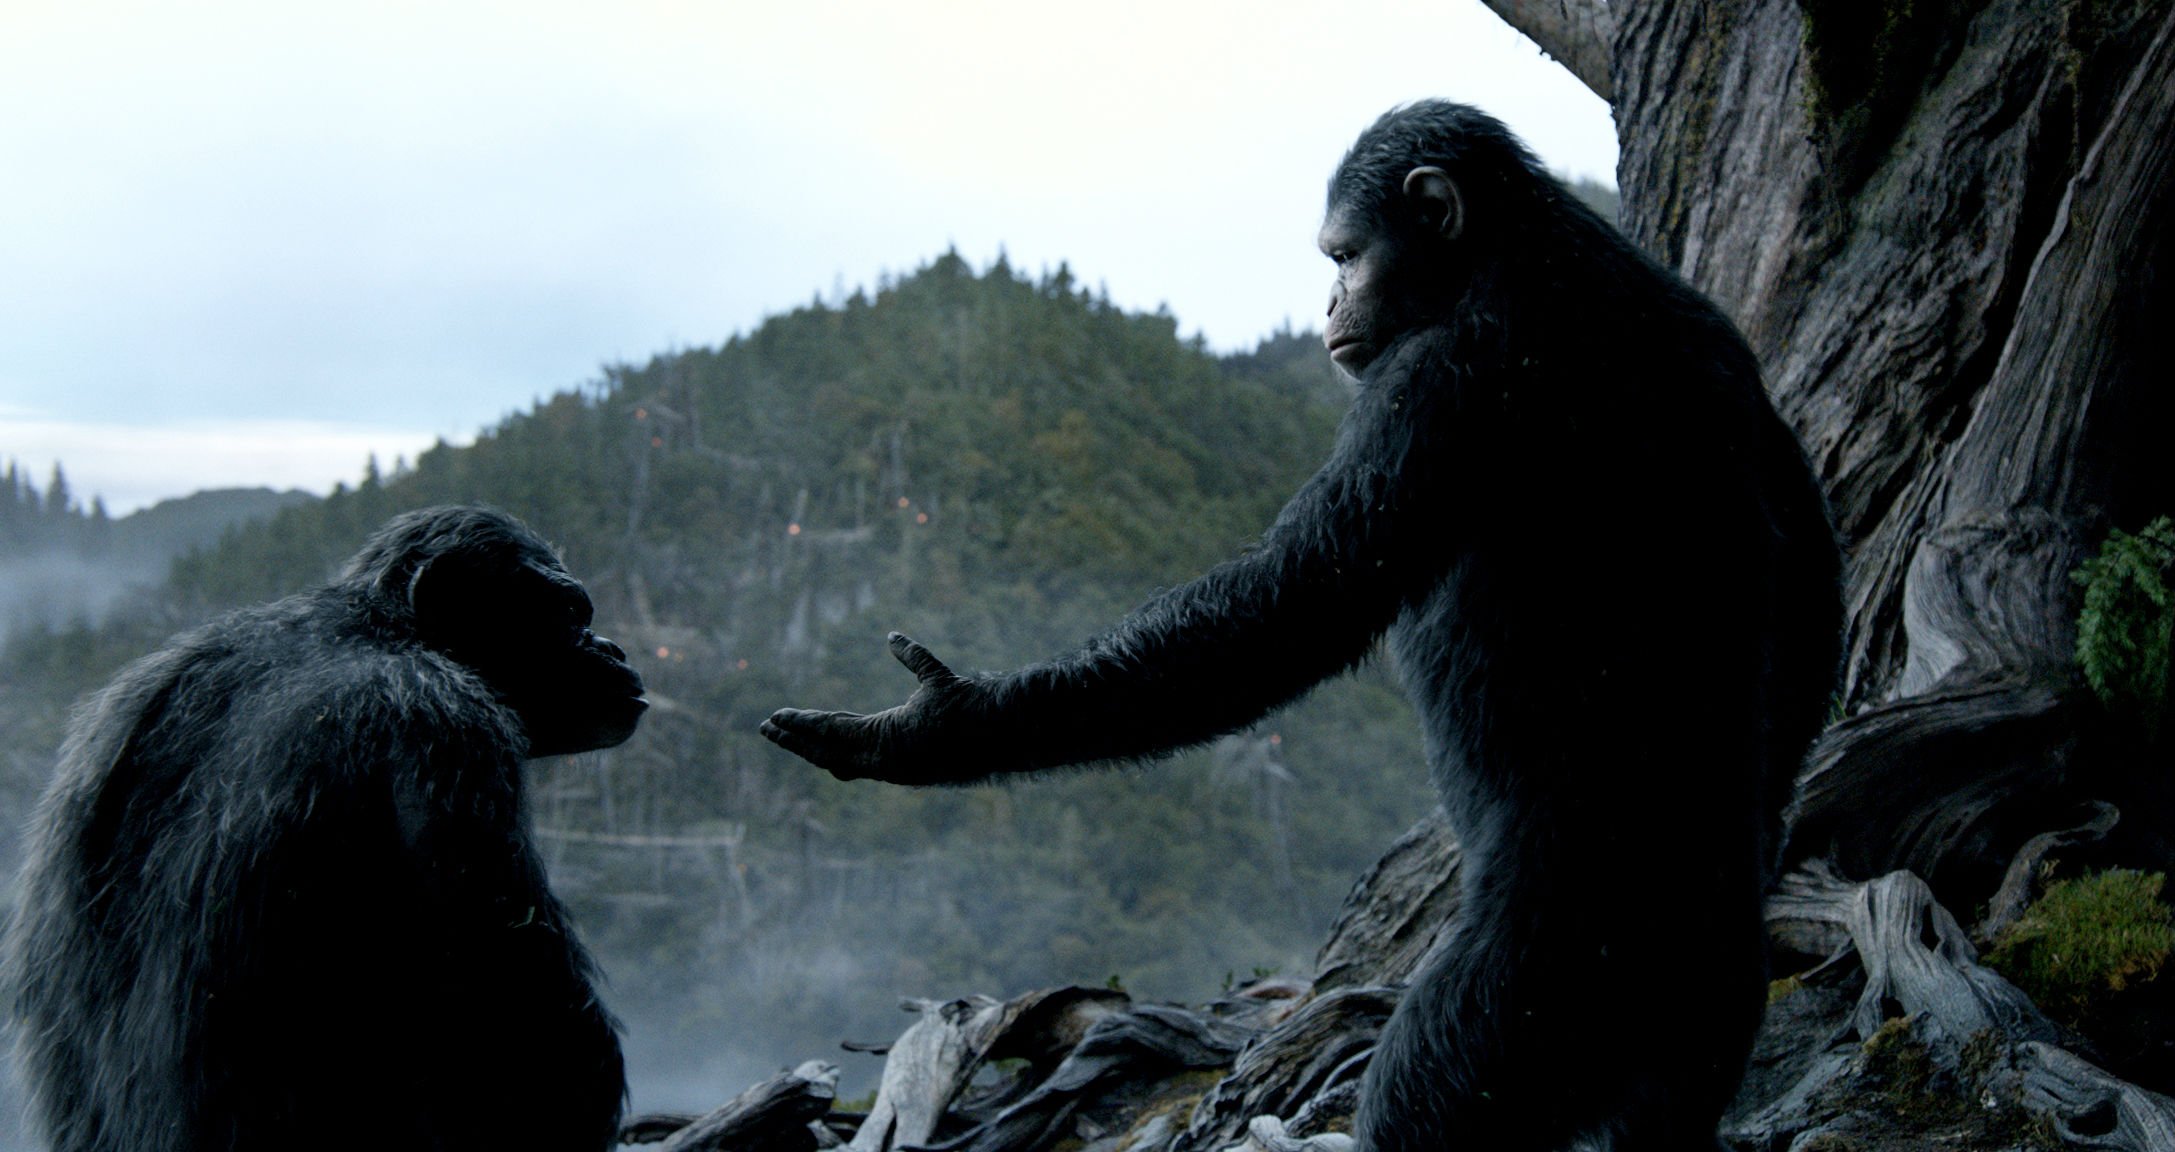 dawn of the apes, Action, Drama, Sci fi, Dawn, Planet, Apes, Monkey, Adventure,  19 Wallpaper